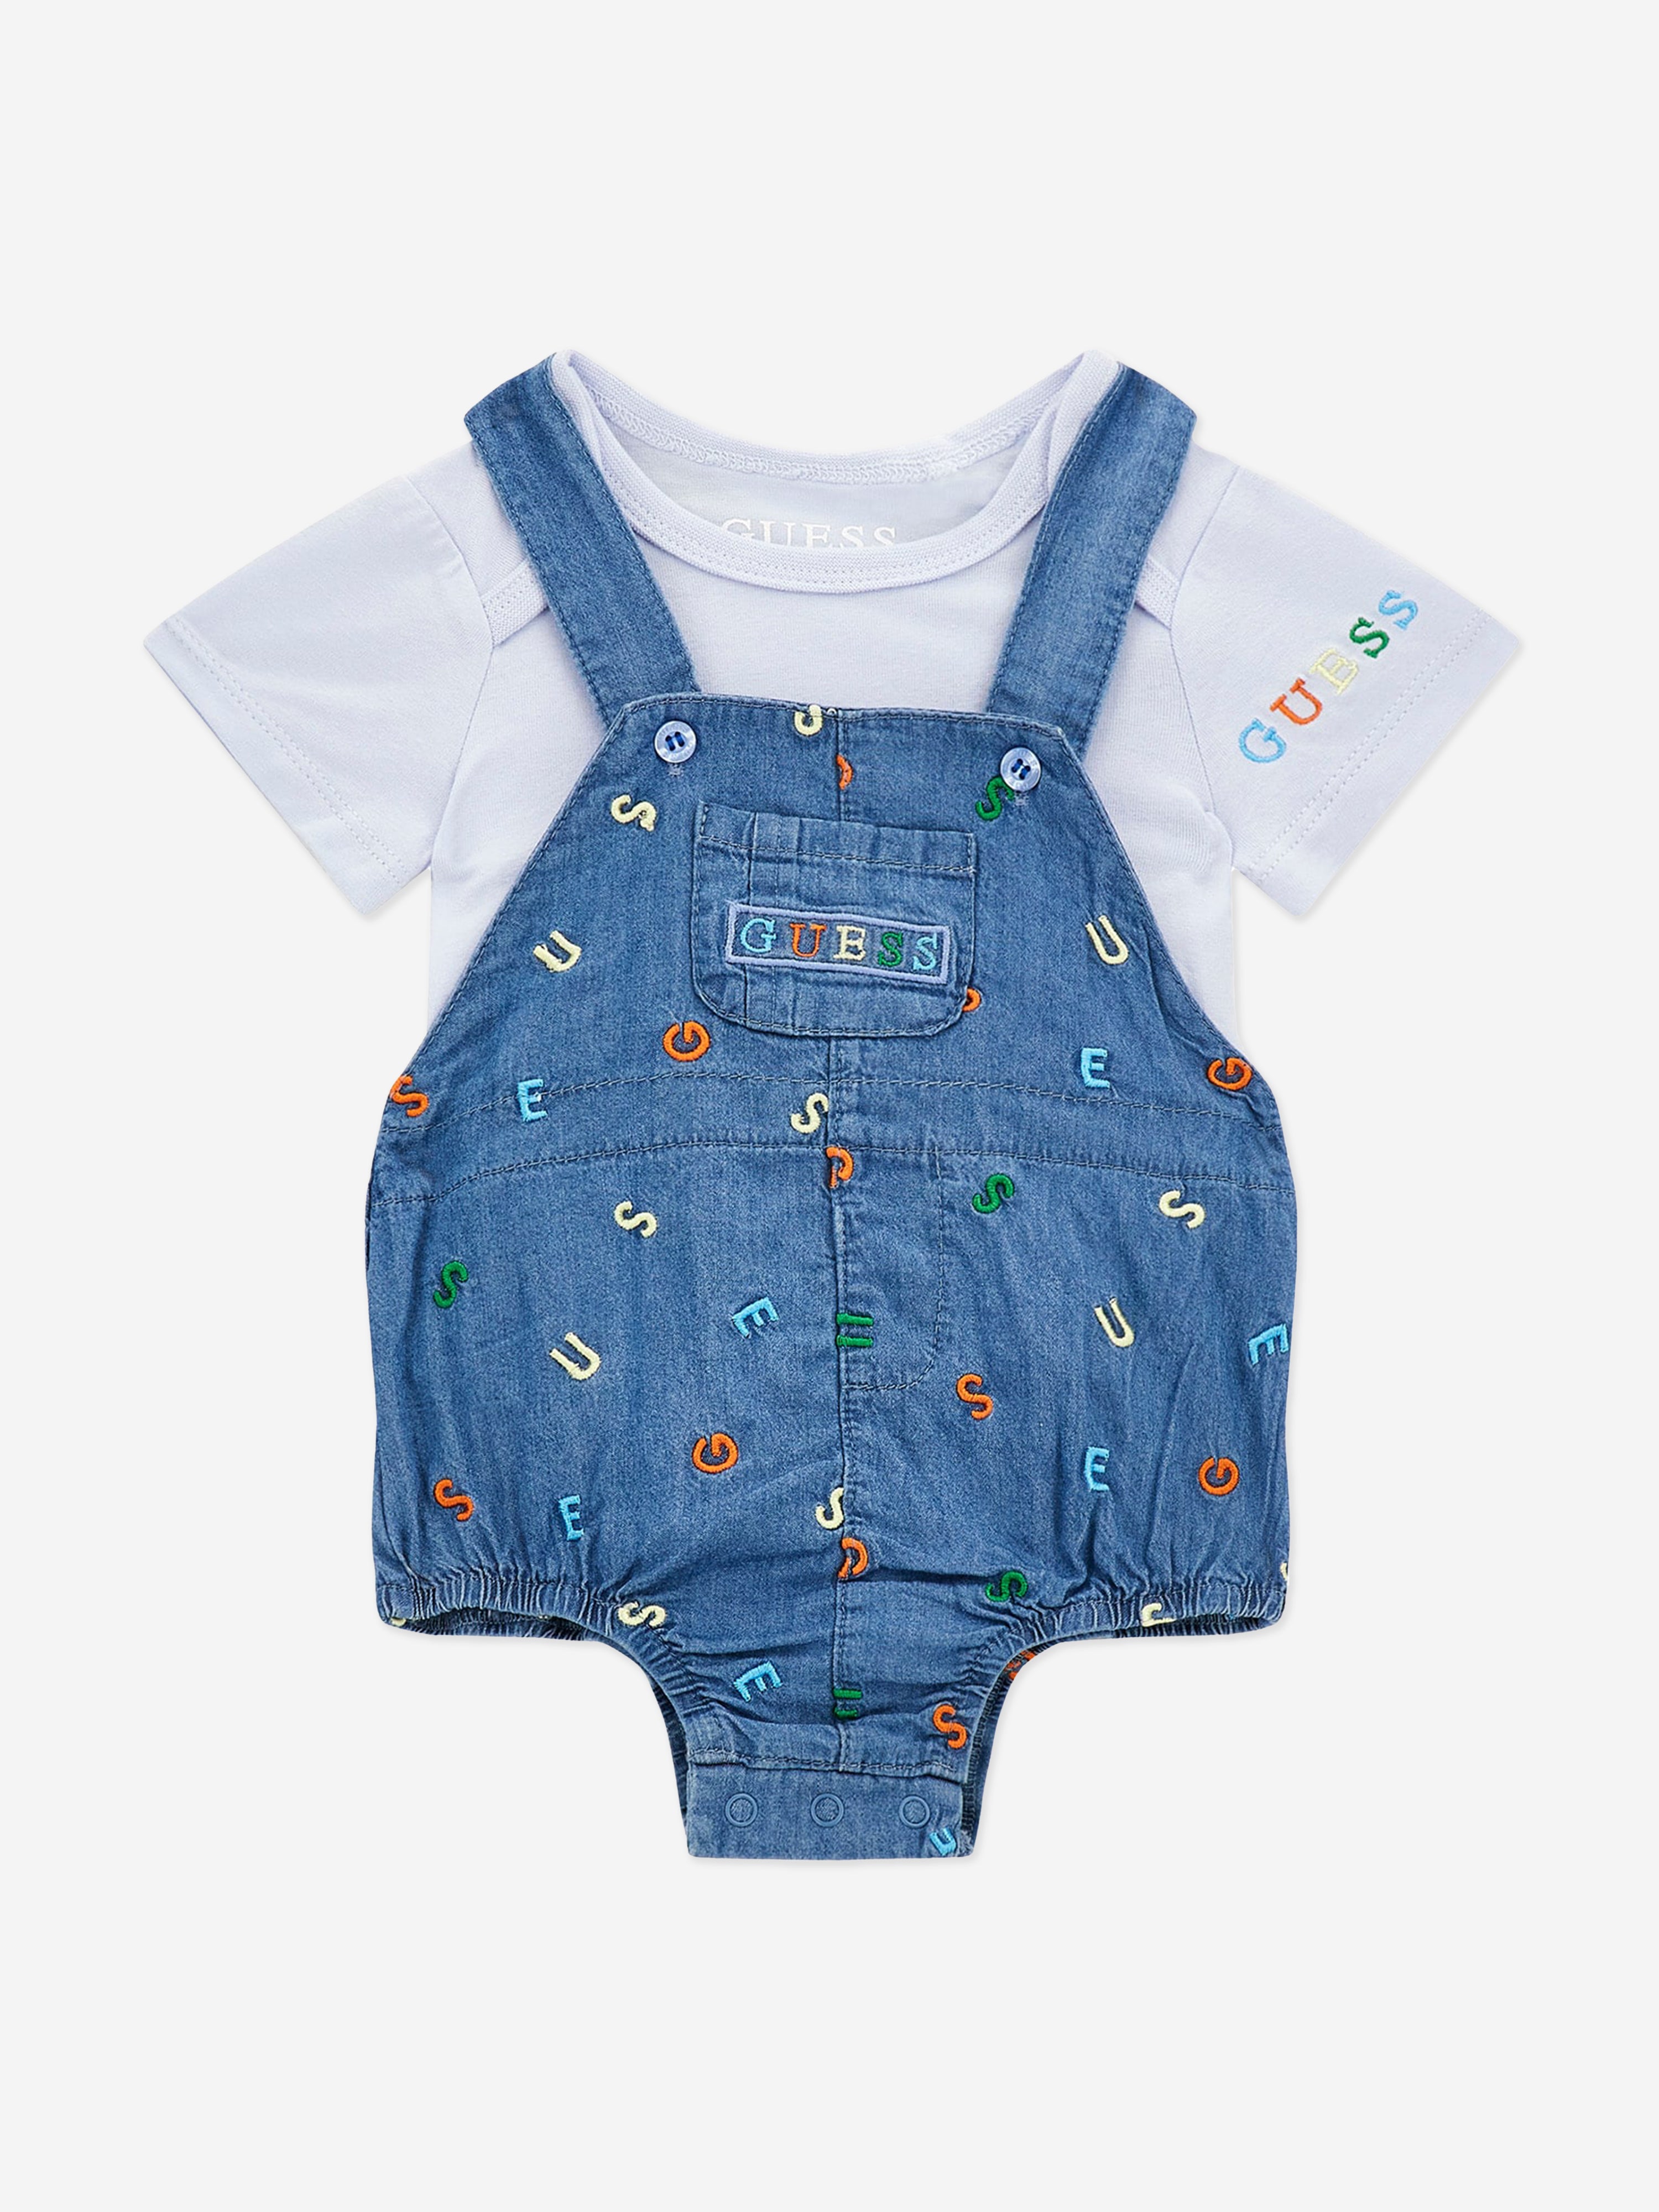 Baby Boy Designer Outfits